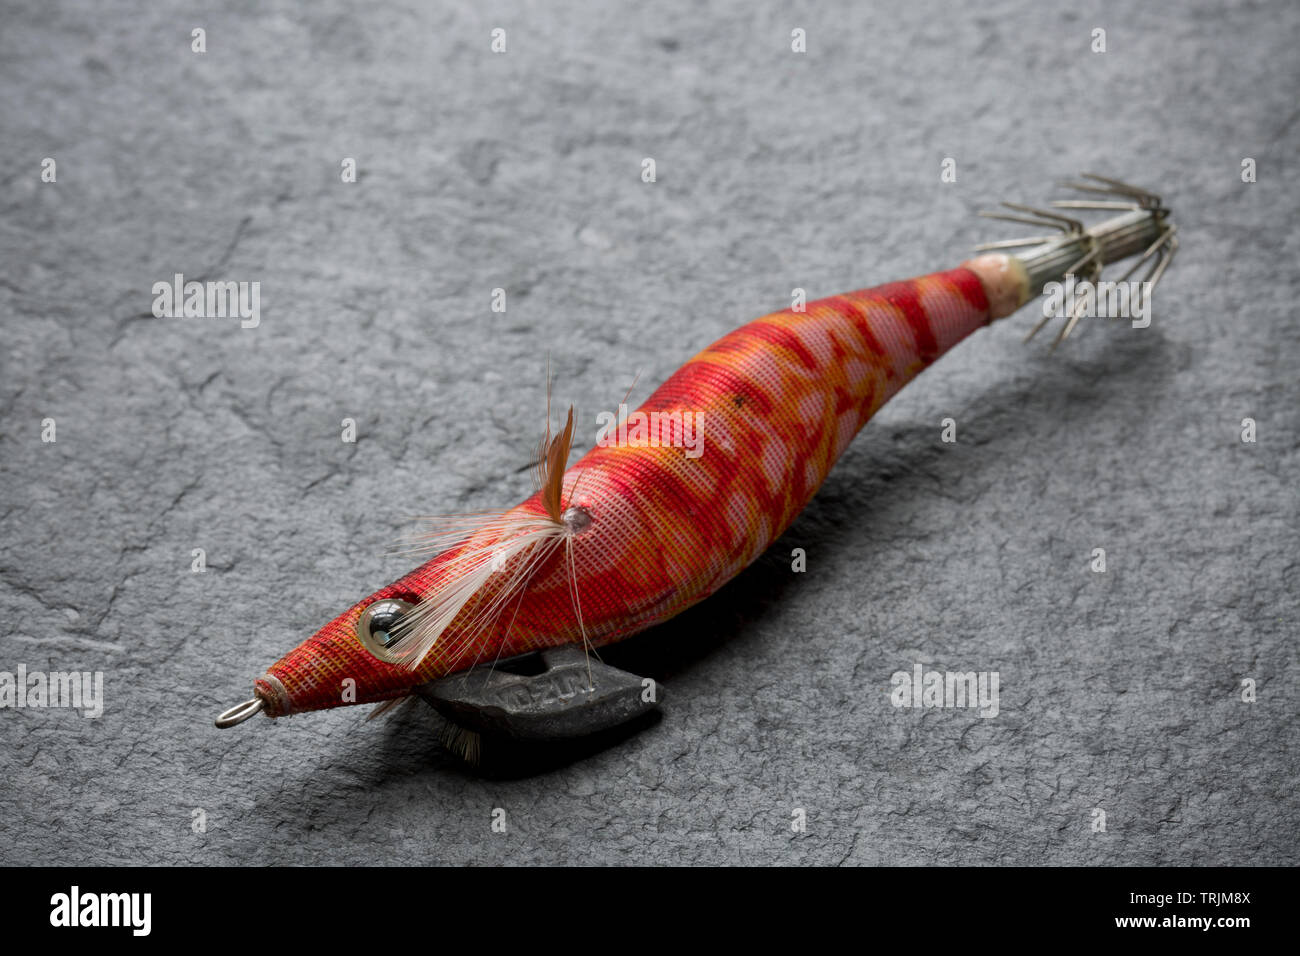 A Yo Zuri squid jig, or lure. Squid fishing has become popular in the UK both for commercial fishermen as well as recreational anglers. The lures are Stock Photo